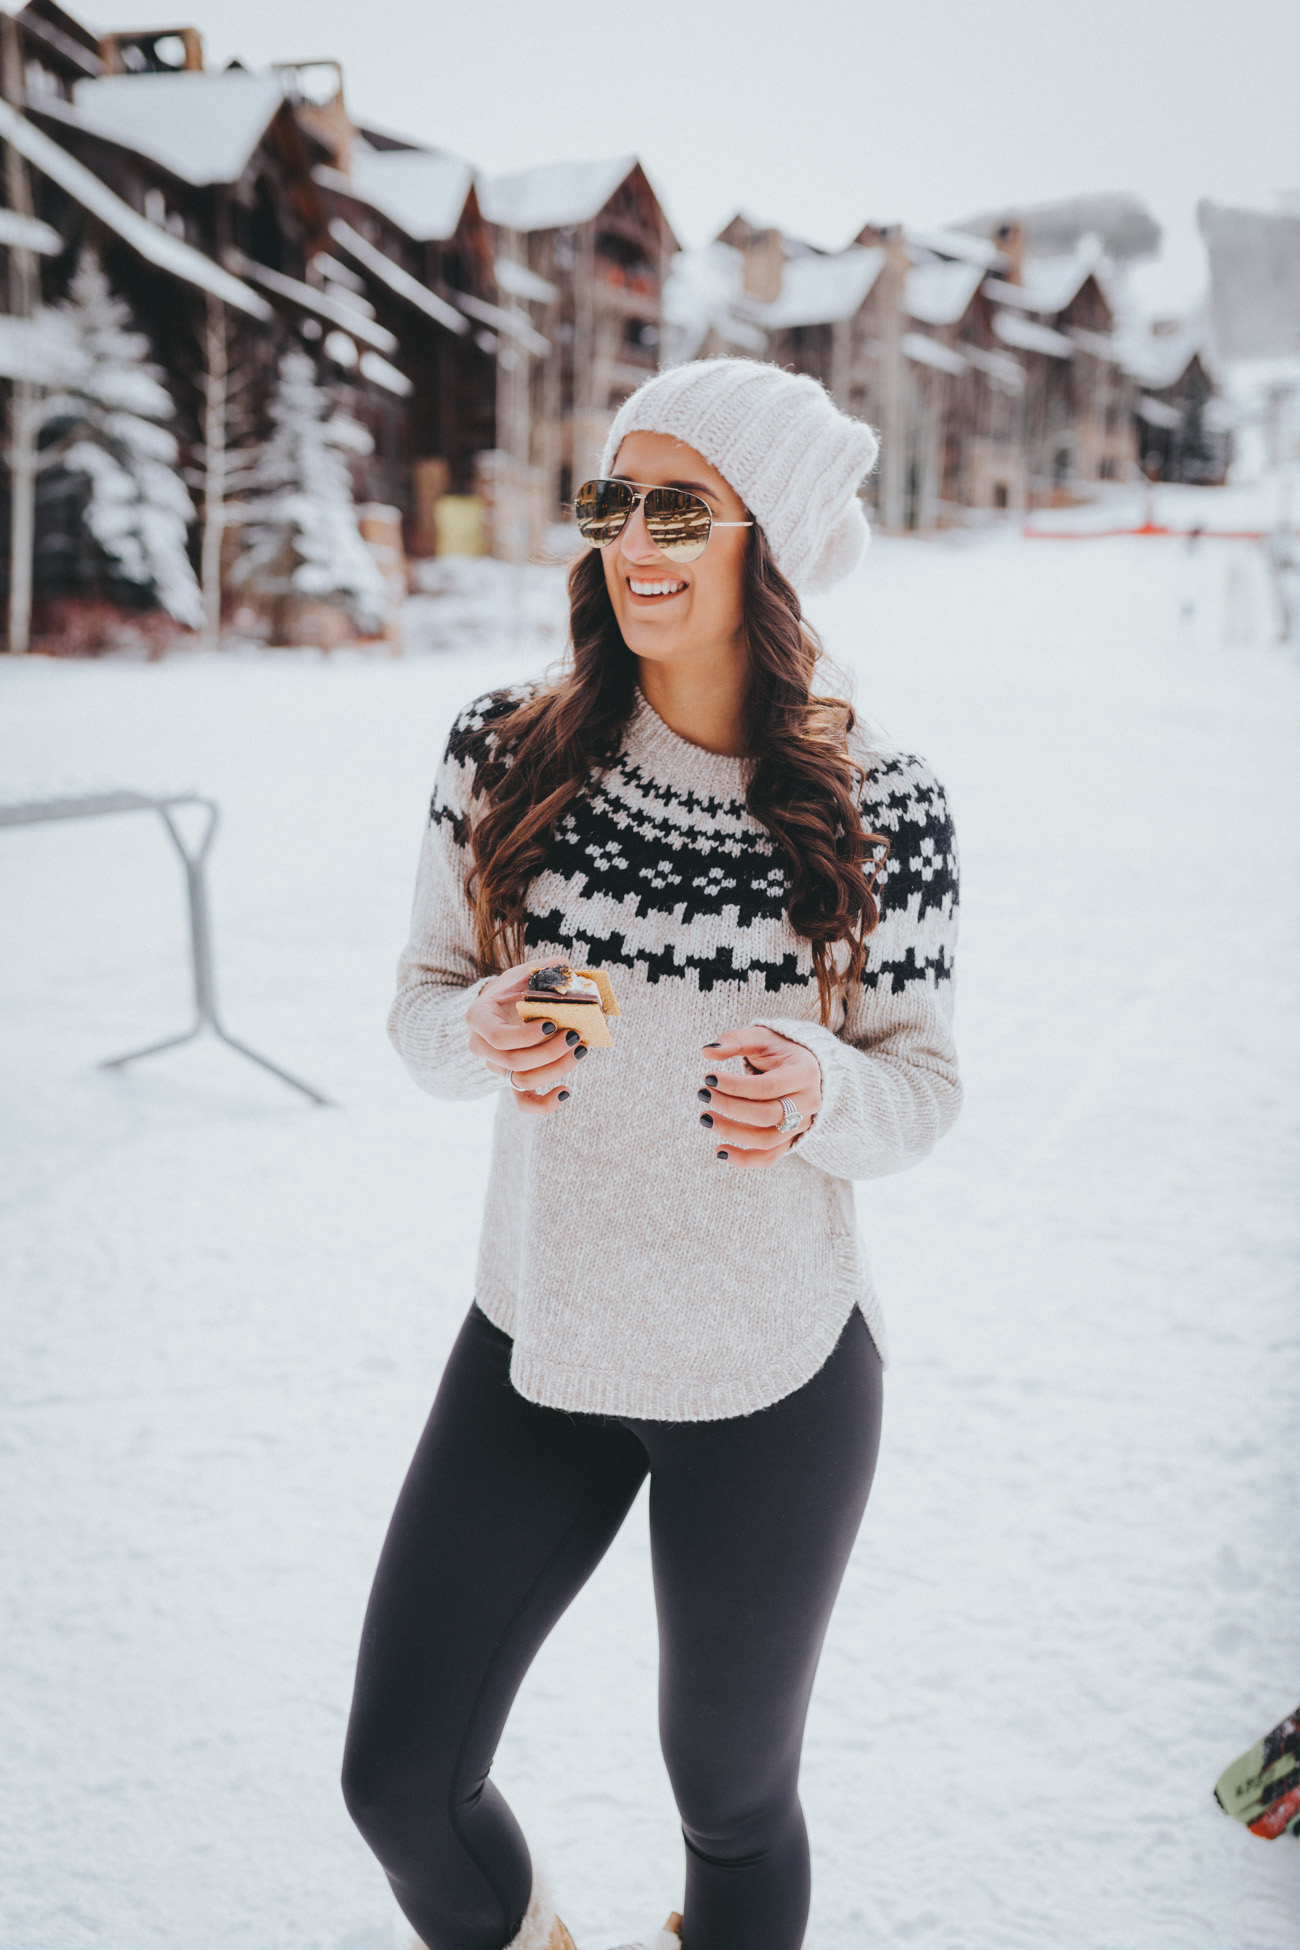 winter style, winter fashion, ritz carlton bachelor gulch, vail colorado, best places to stay in vail, best resorts in colorado, mountain style, mountain resorts, ski resorts, ritz carlton vail, beaver creek colorado, where to stay in colorado, vail guide // grace wainwright a southern drawl